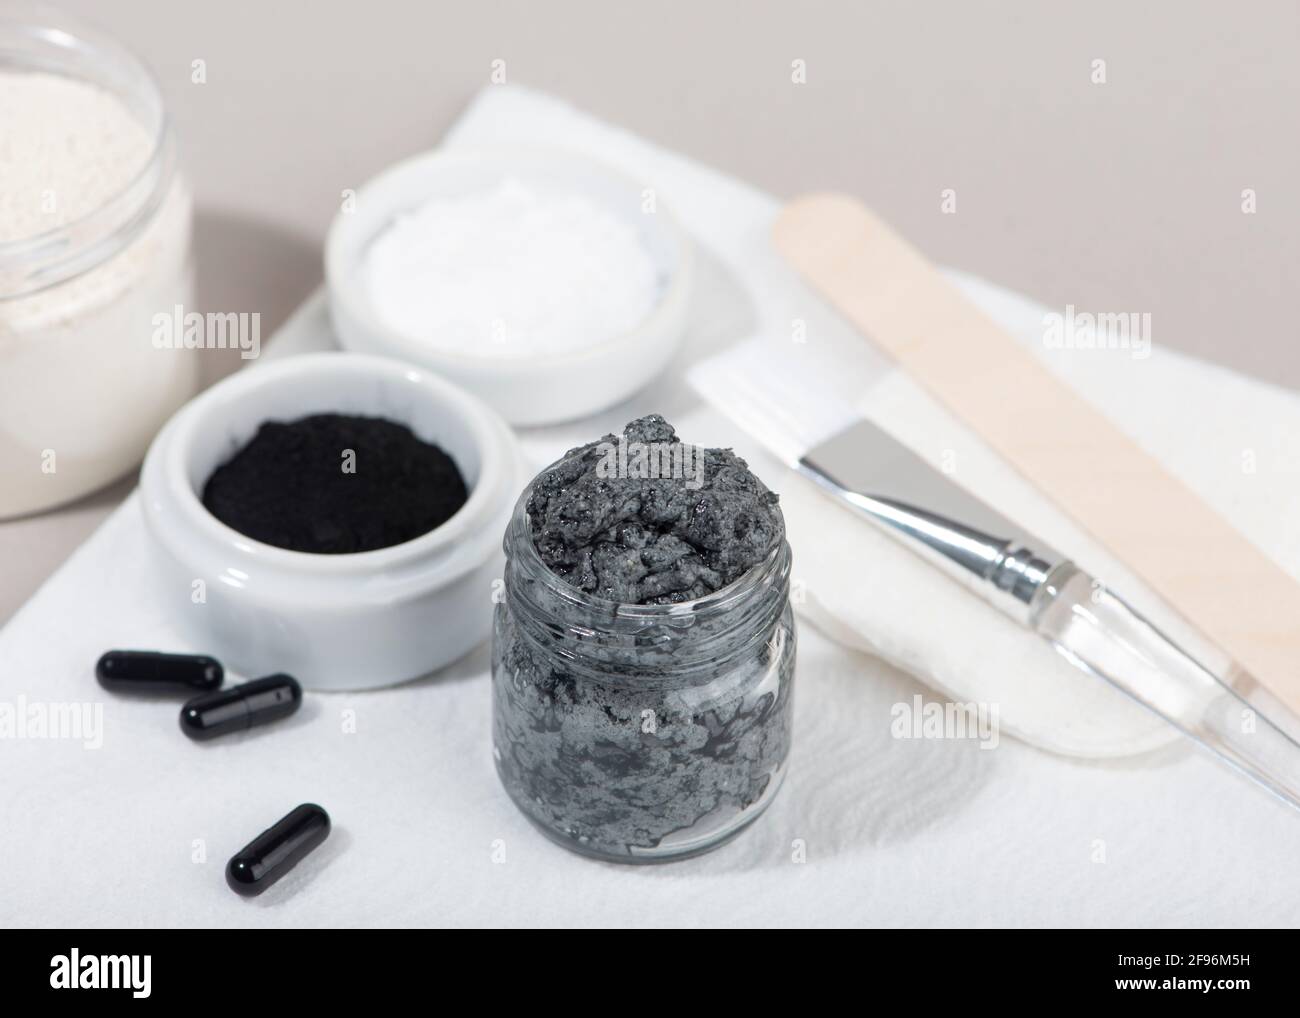 Ingredients for a homemade charcoal facial mask. Charcoal powder, coconut oil, white cosmetic clay. Home beauty concept. Stock Photo